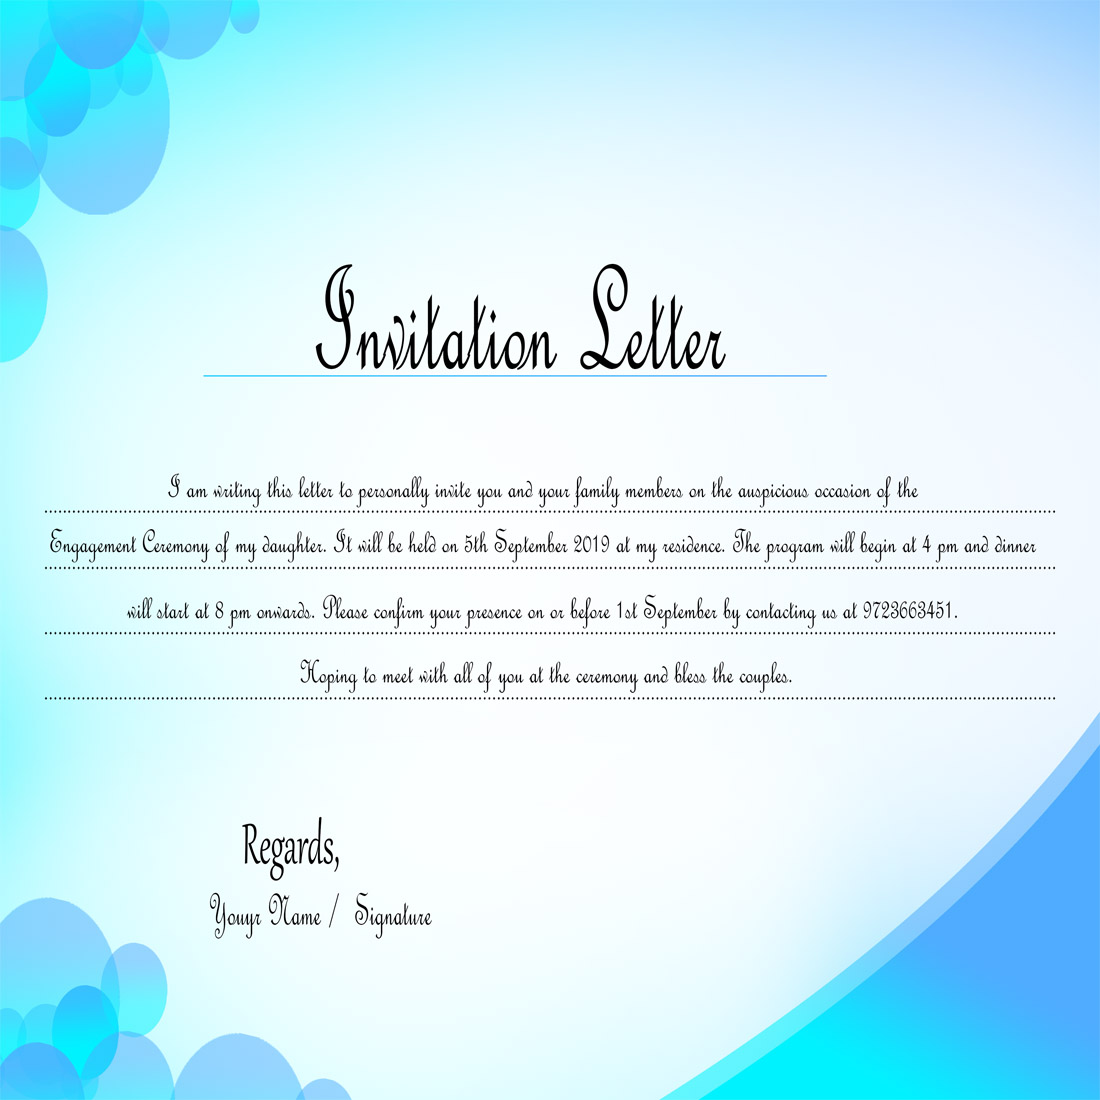 business invitation letter preview image.